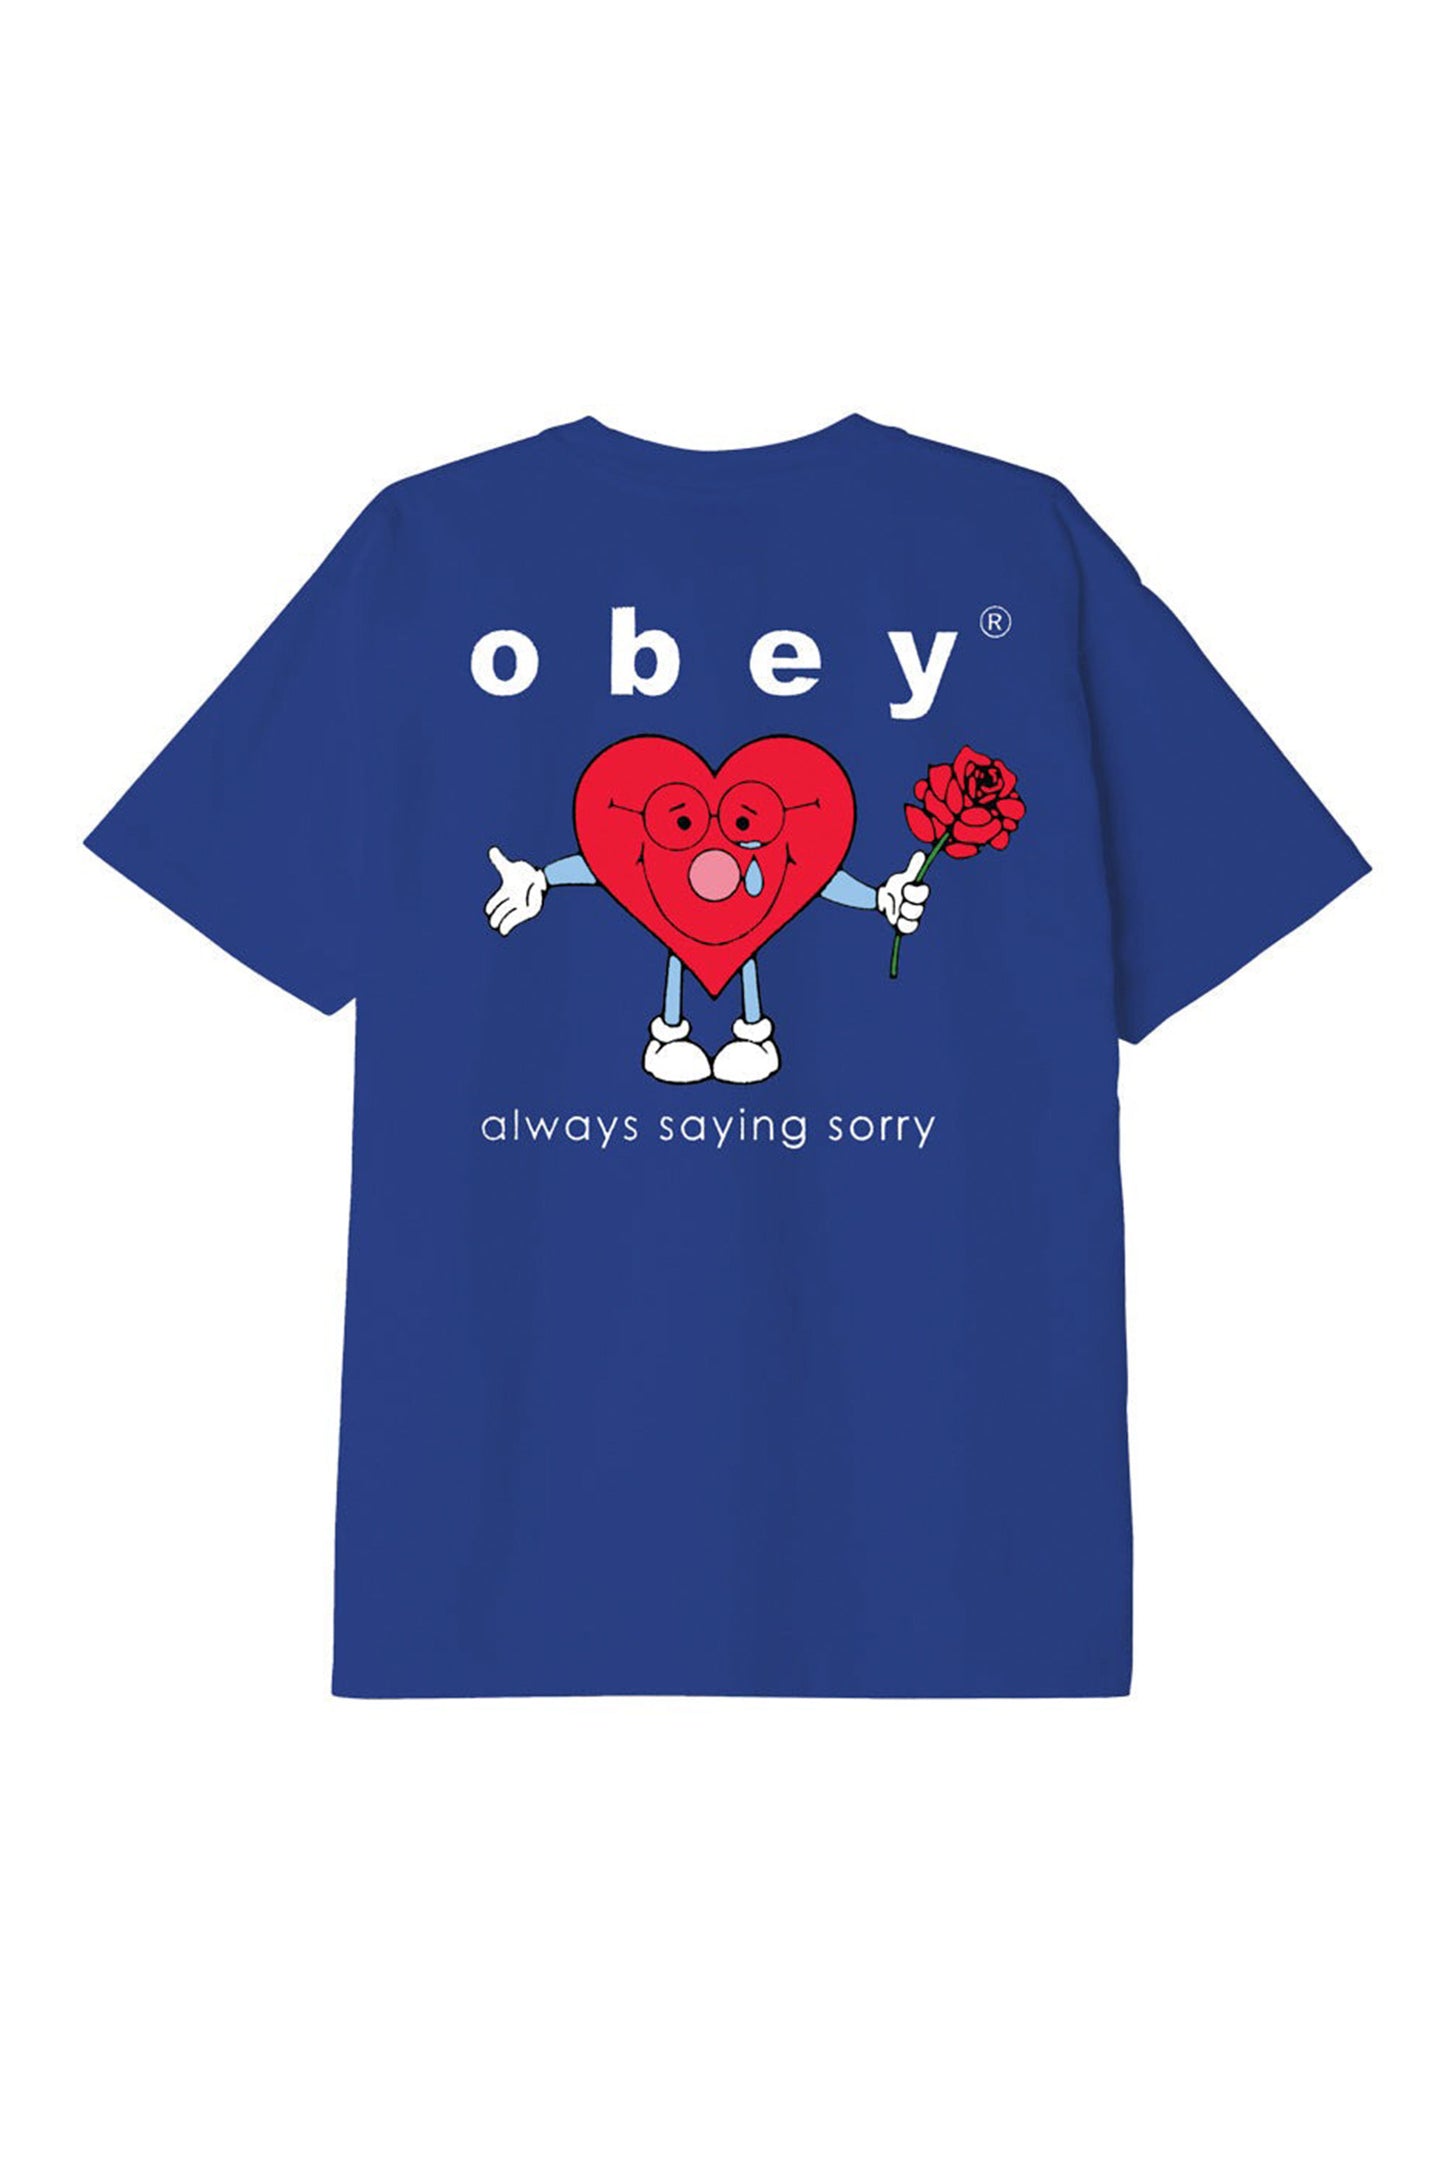 Pukas-Surf-Shop-Obey-Tee-Obey-always-saying-sorry